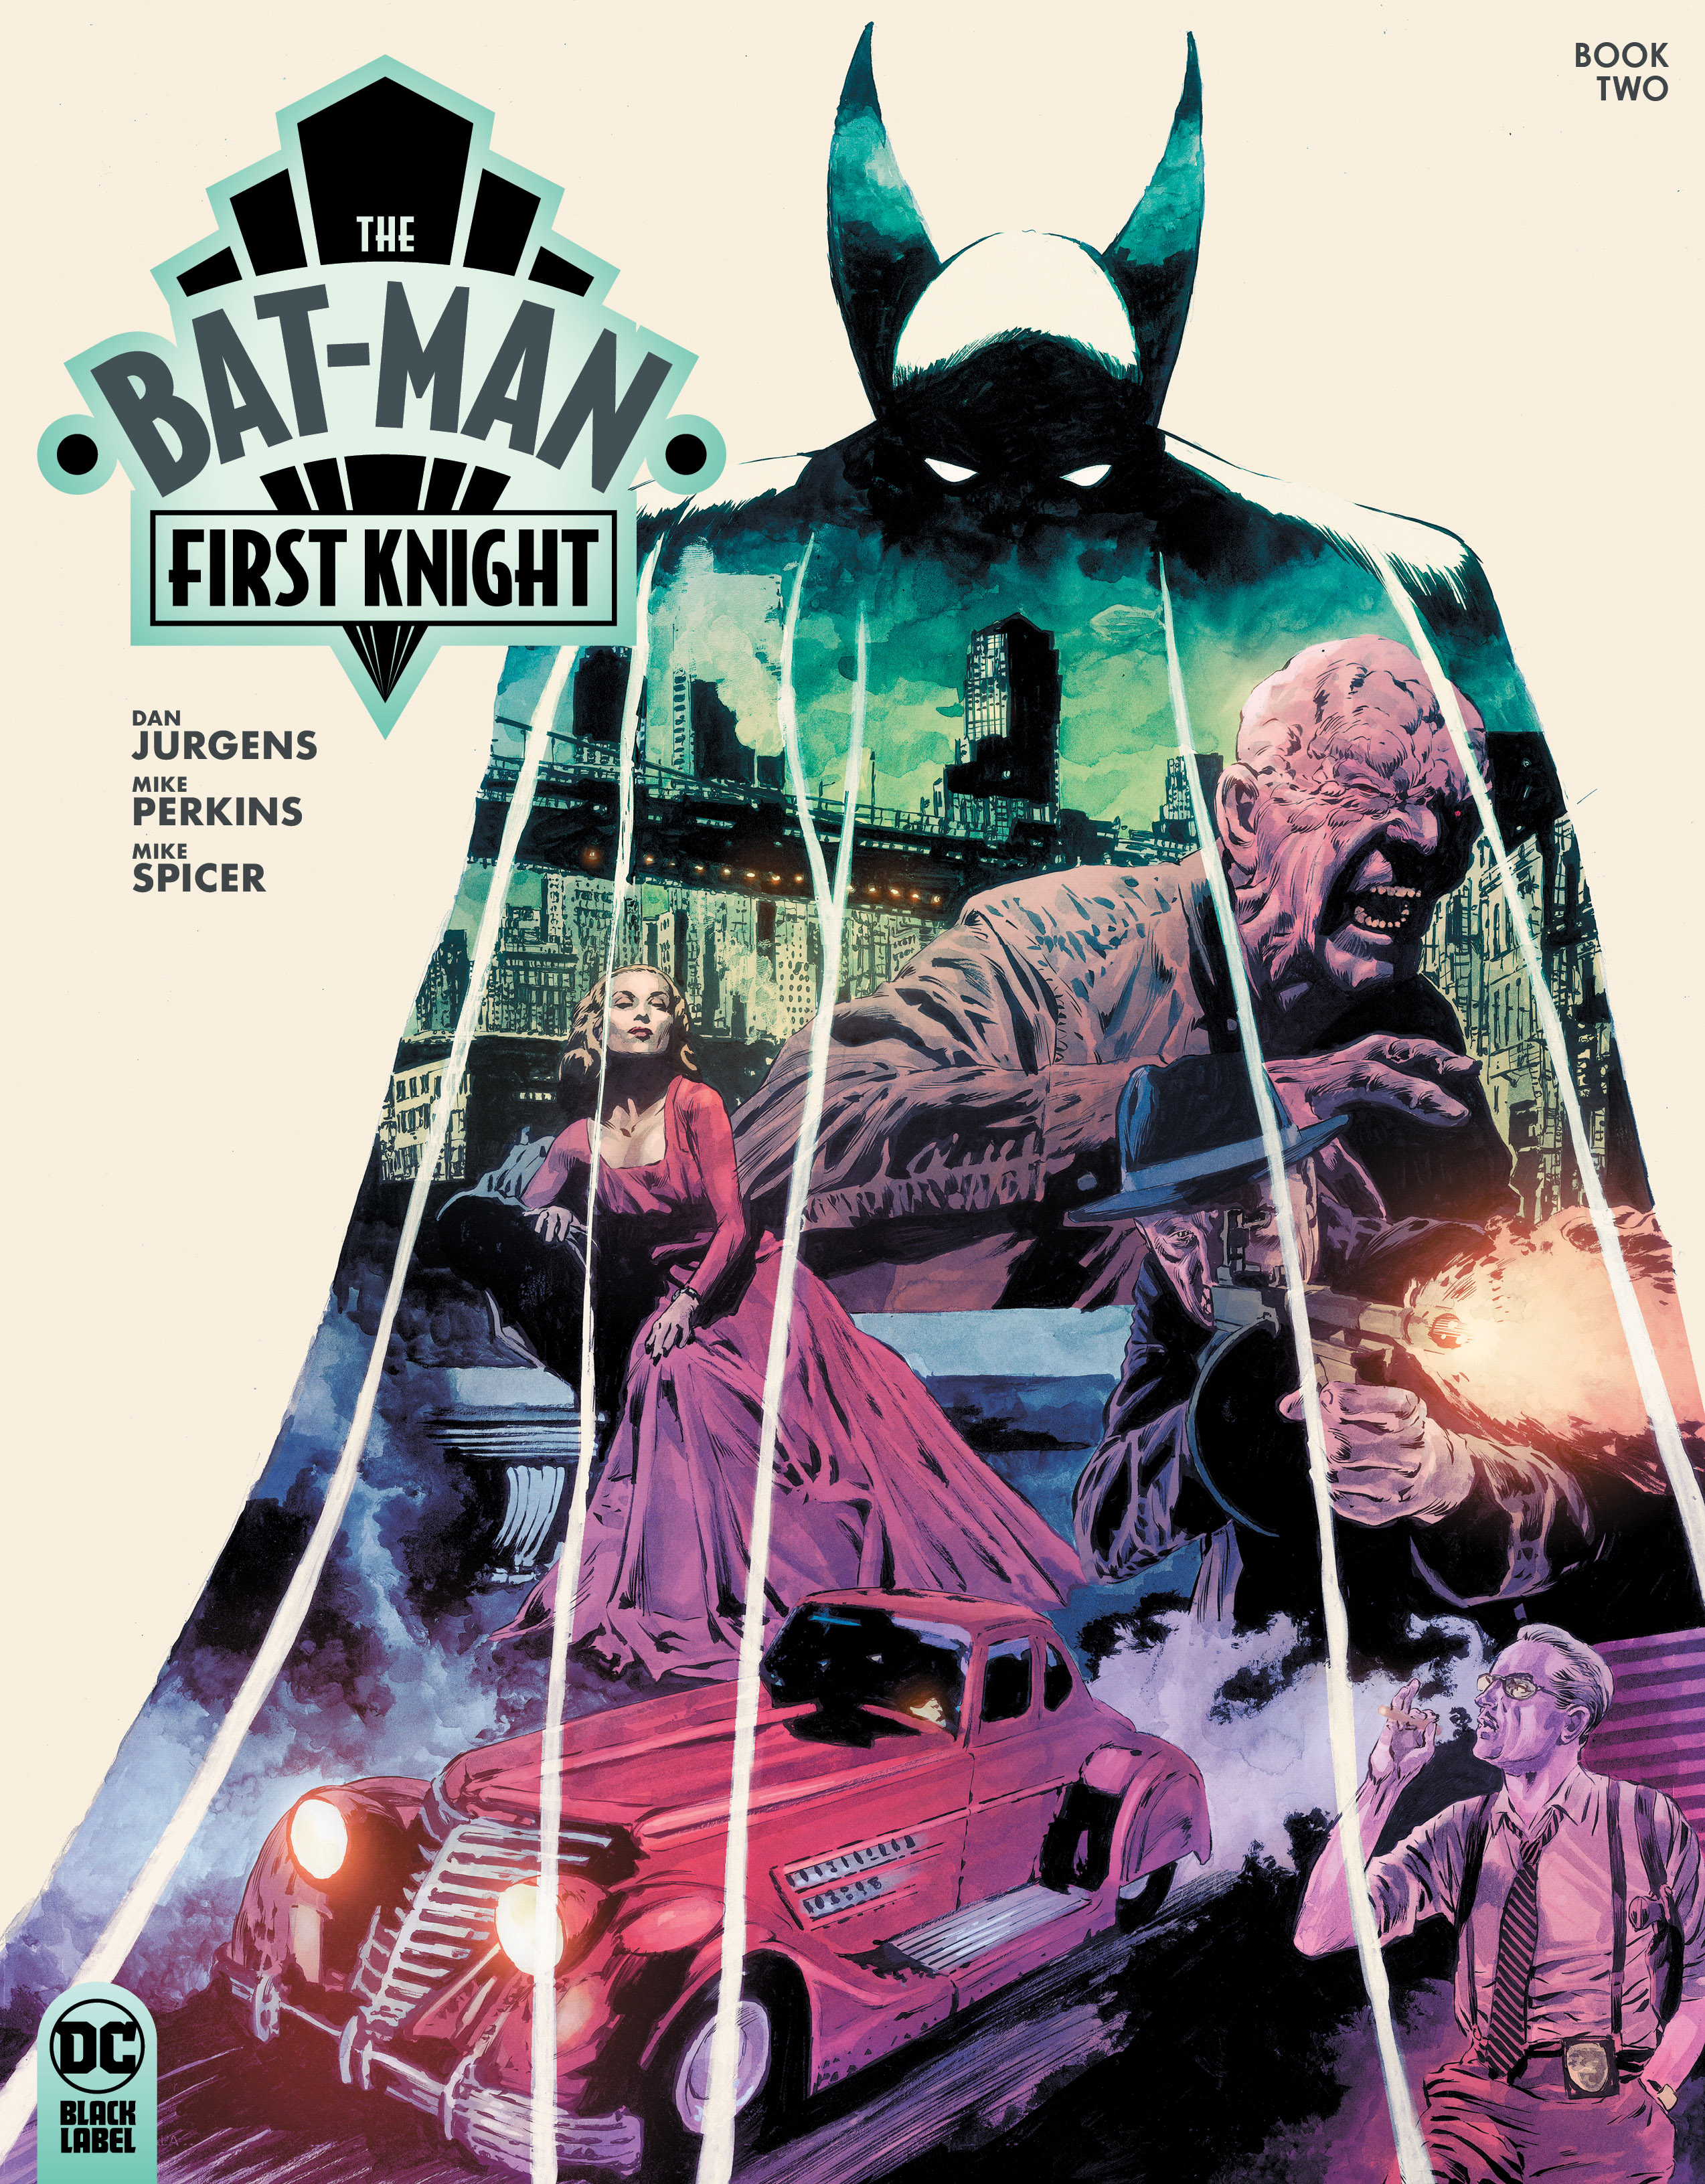 The Bat-Man First Knight #2 Cover A Mike Perkins (Mature) (Of 3)